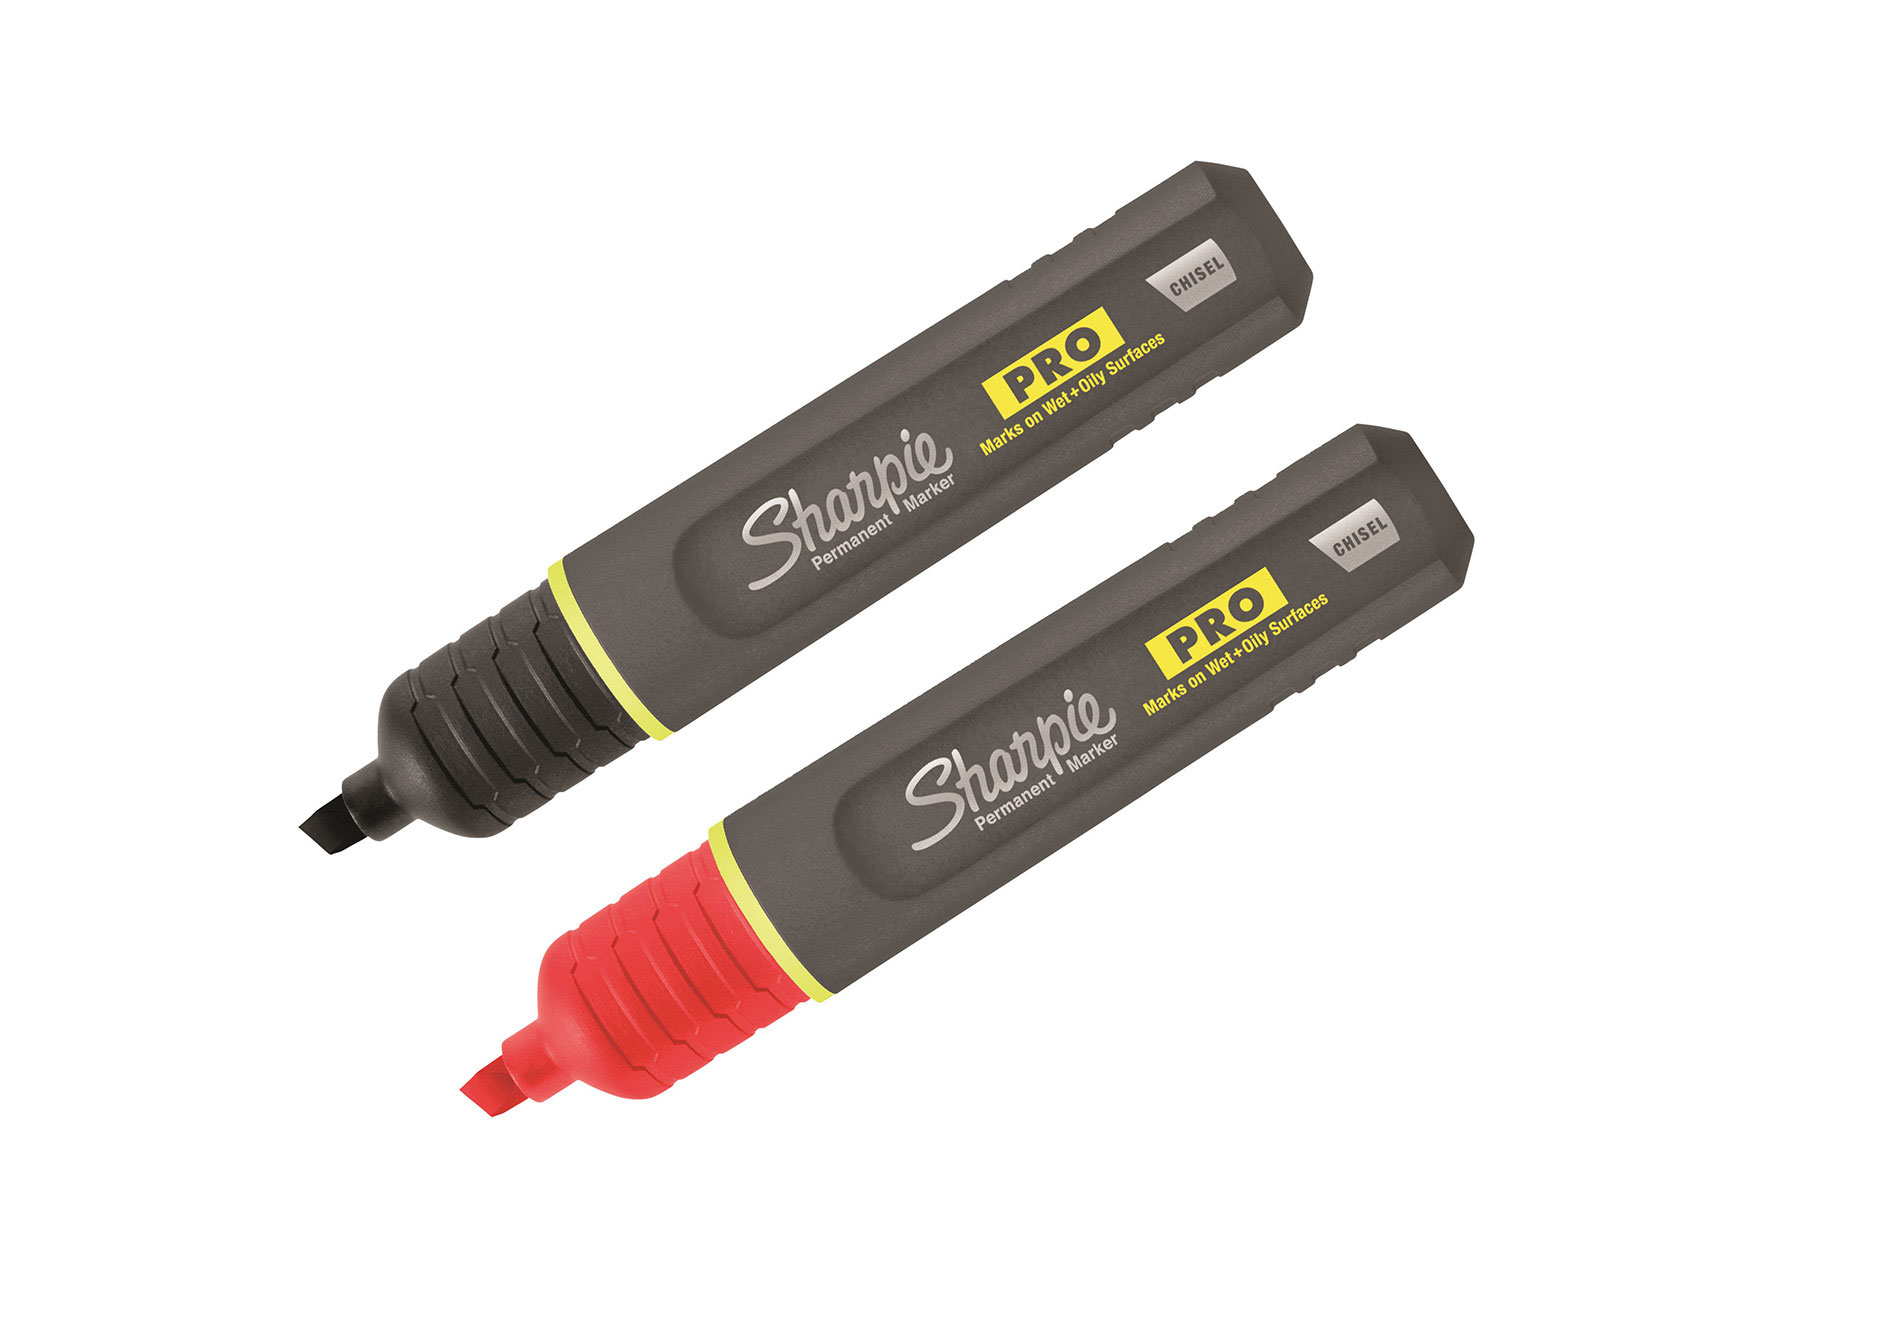 Sharpies' Pro Precision Marker - Electrical Contractor Magazine